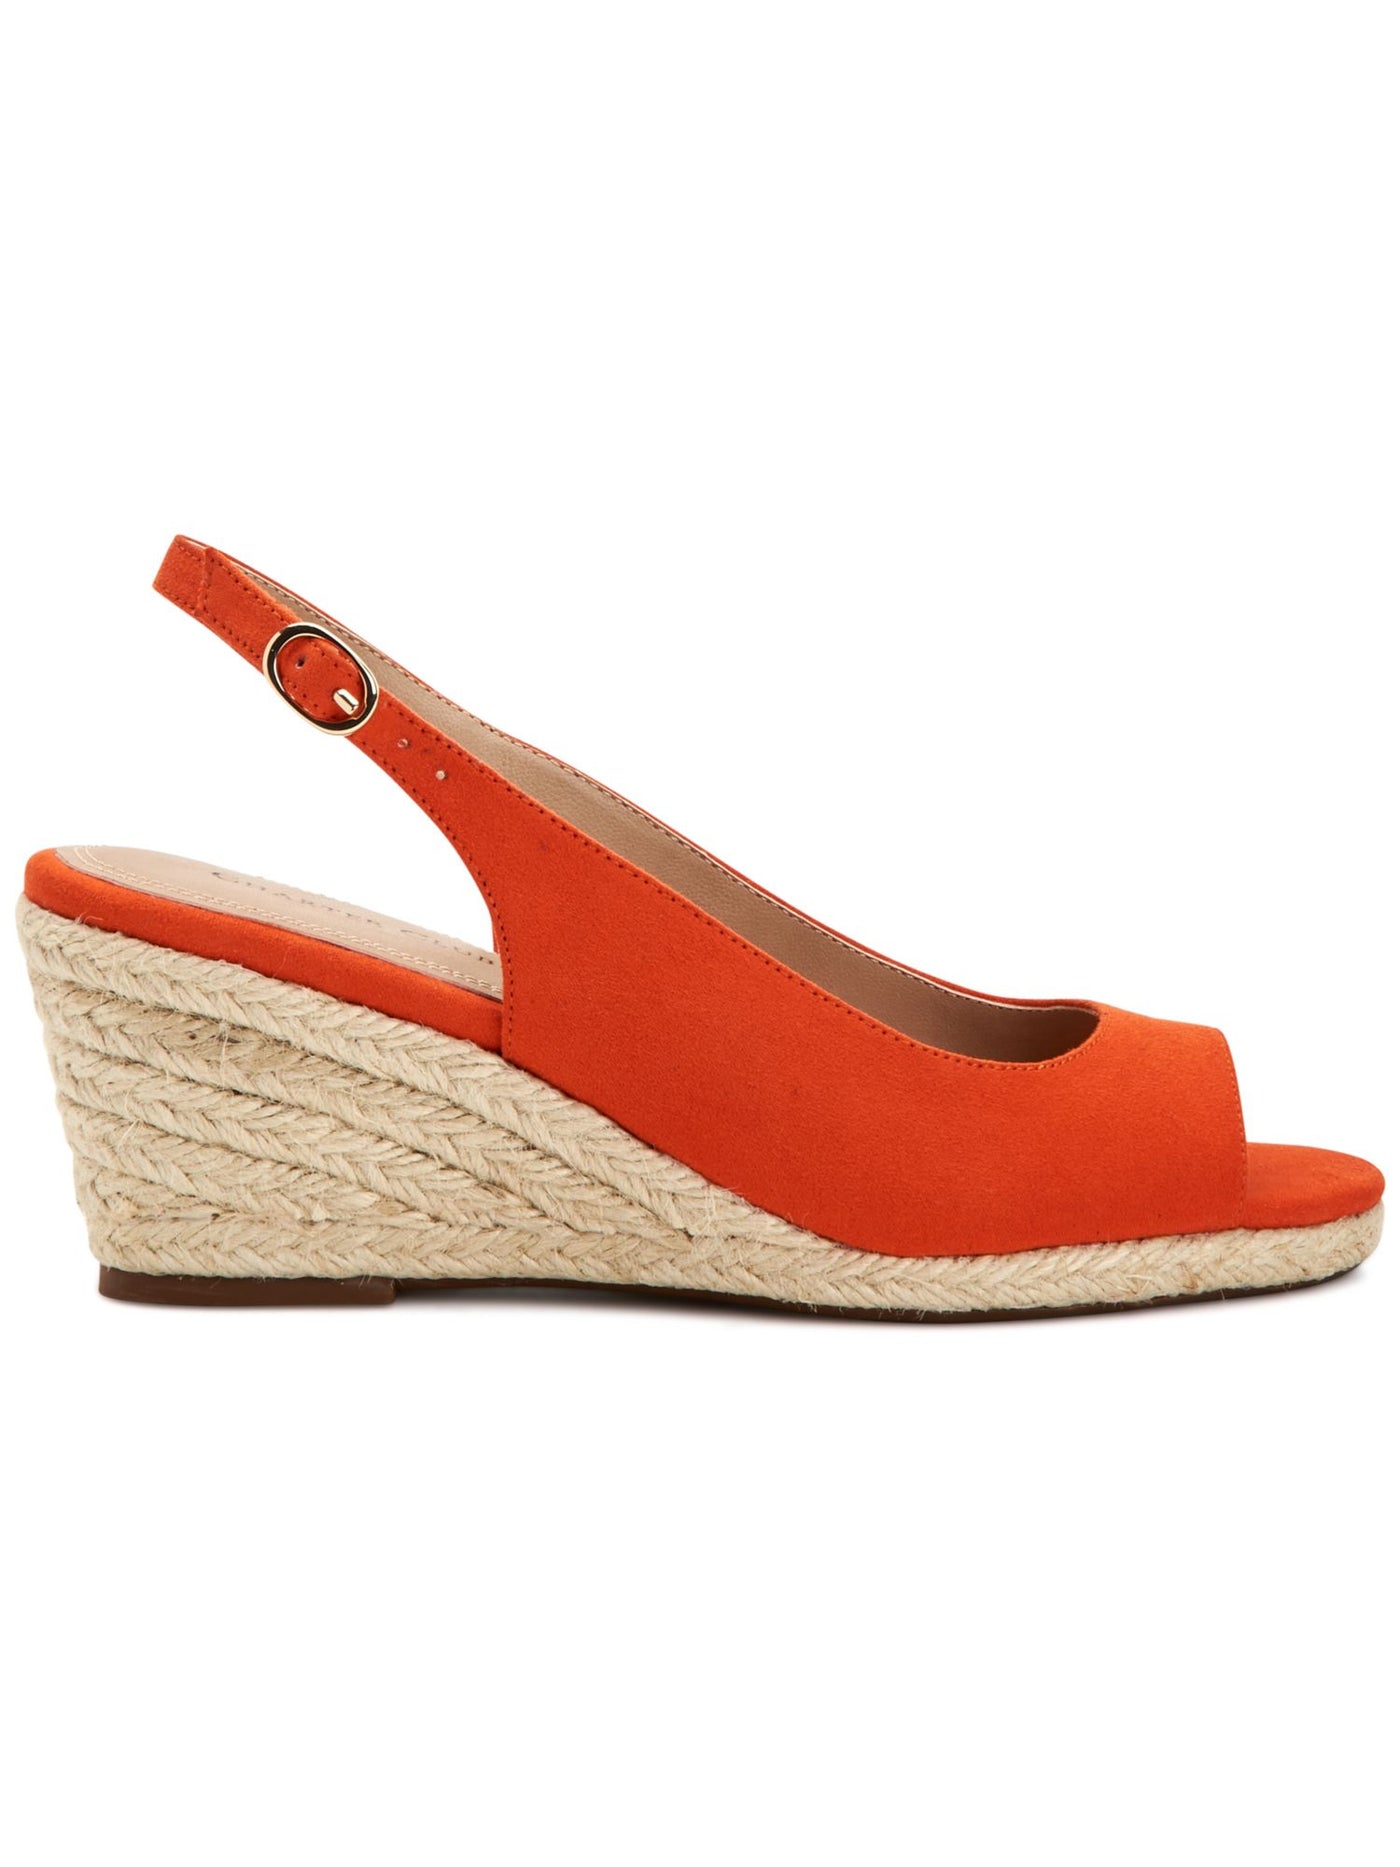 CHARTER CLUB Womens Orange Padded Ankle Strap Tamaare Round Toe Wedge Buckle Espadrille Shoes 5 M